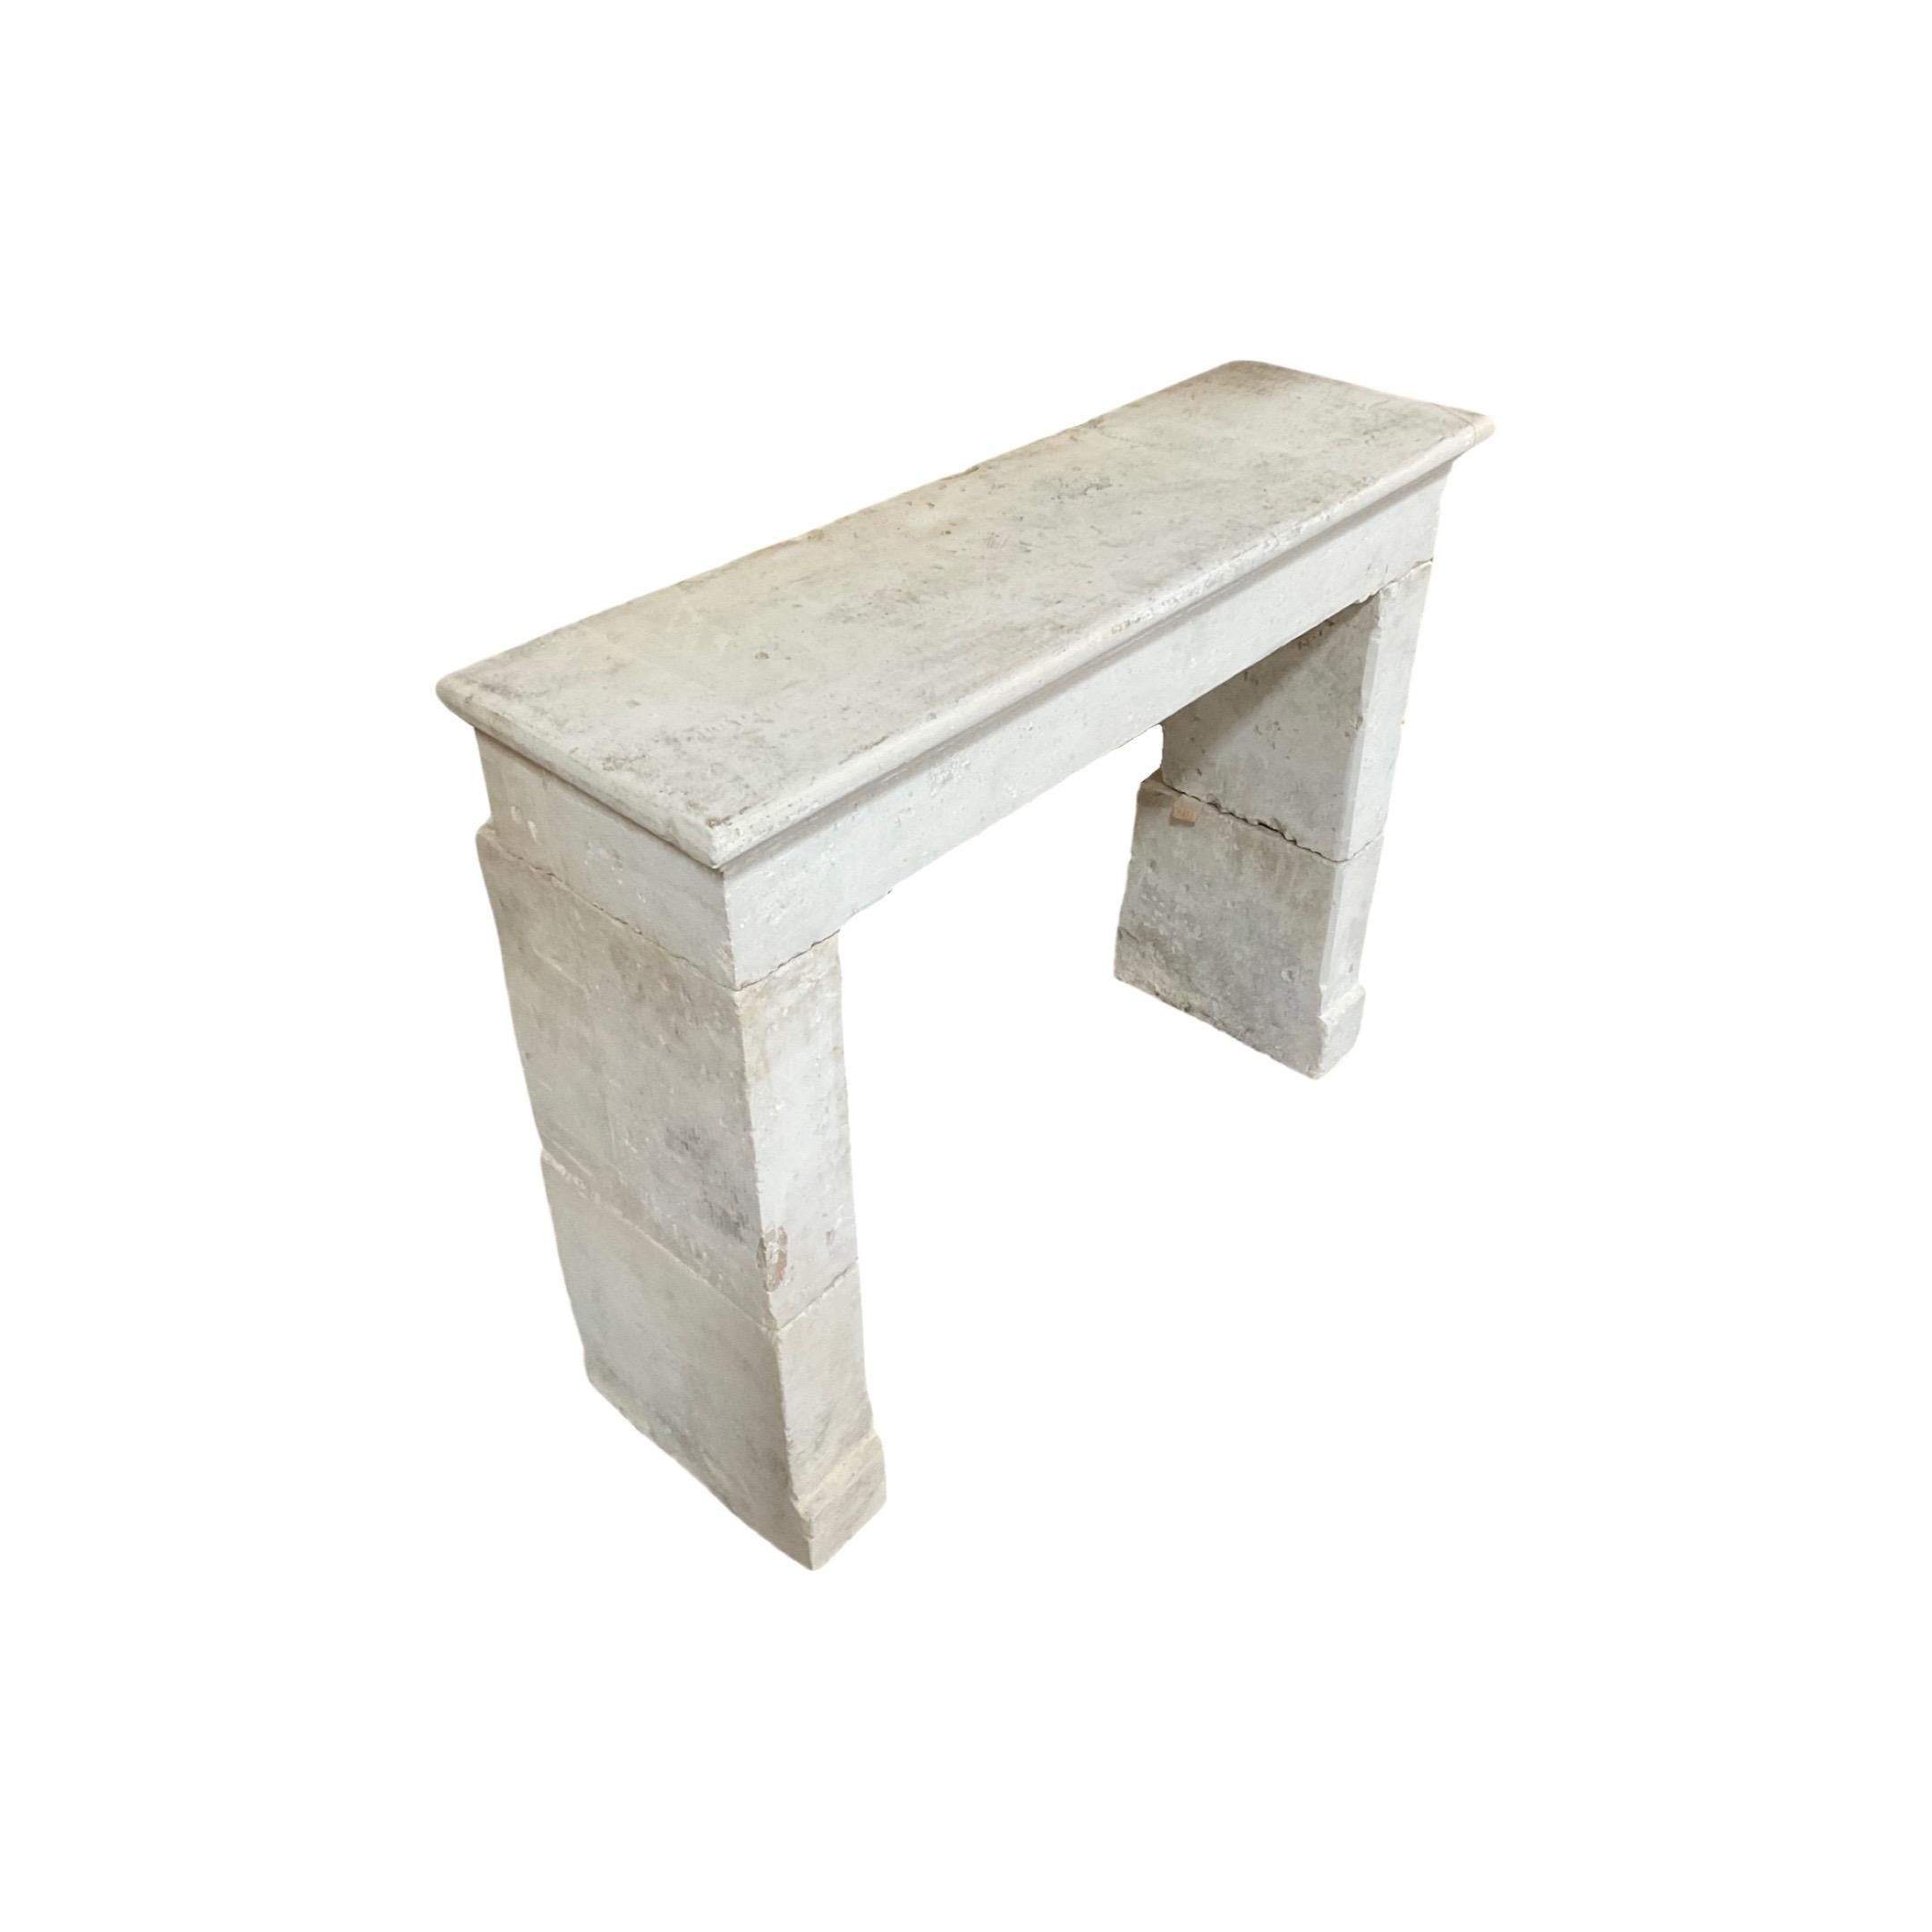 This authentic French Limestone Mantel is a stunning piece from the 1880s. Crafted out of durable limestone, this farm house mantel is the perfect addition to your home or office. With its Classic design, this mantel is a timeless piece and an